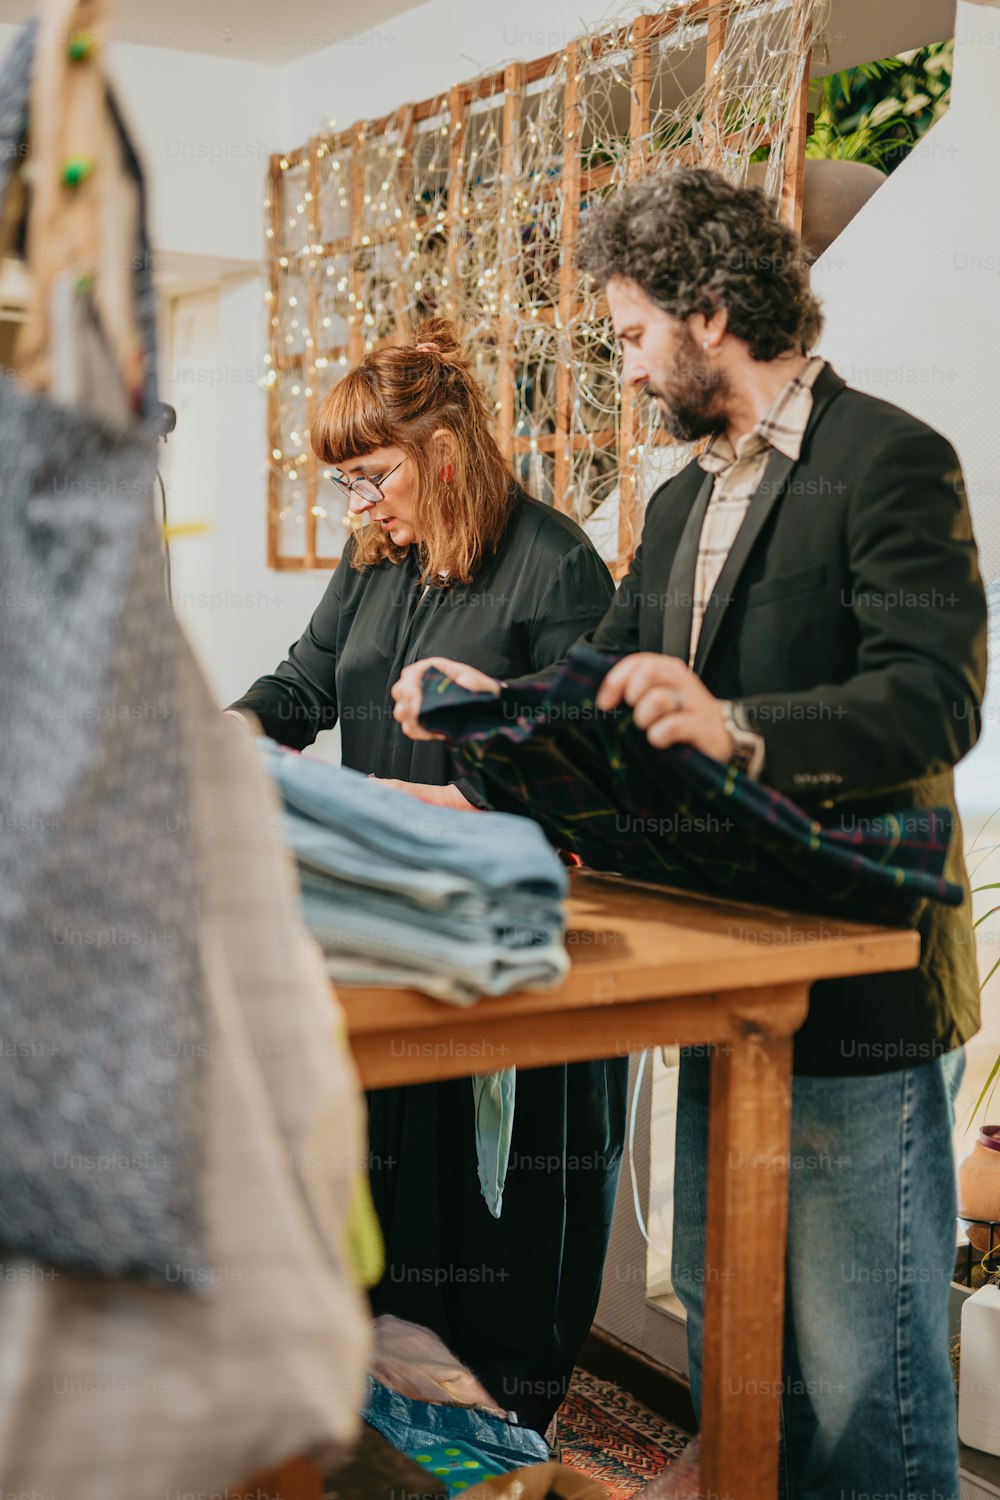 a man and woman looking at clothes on a table